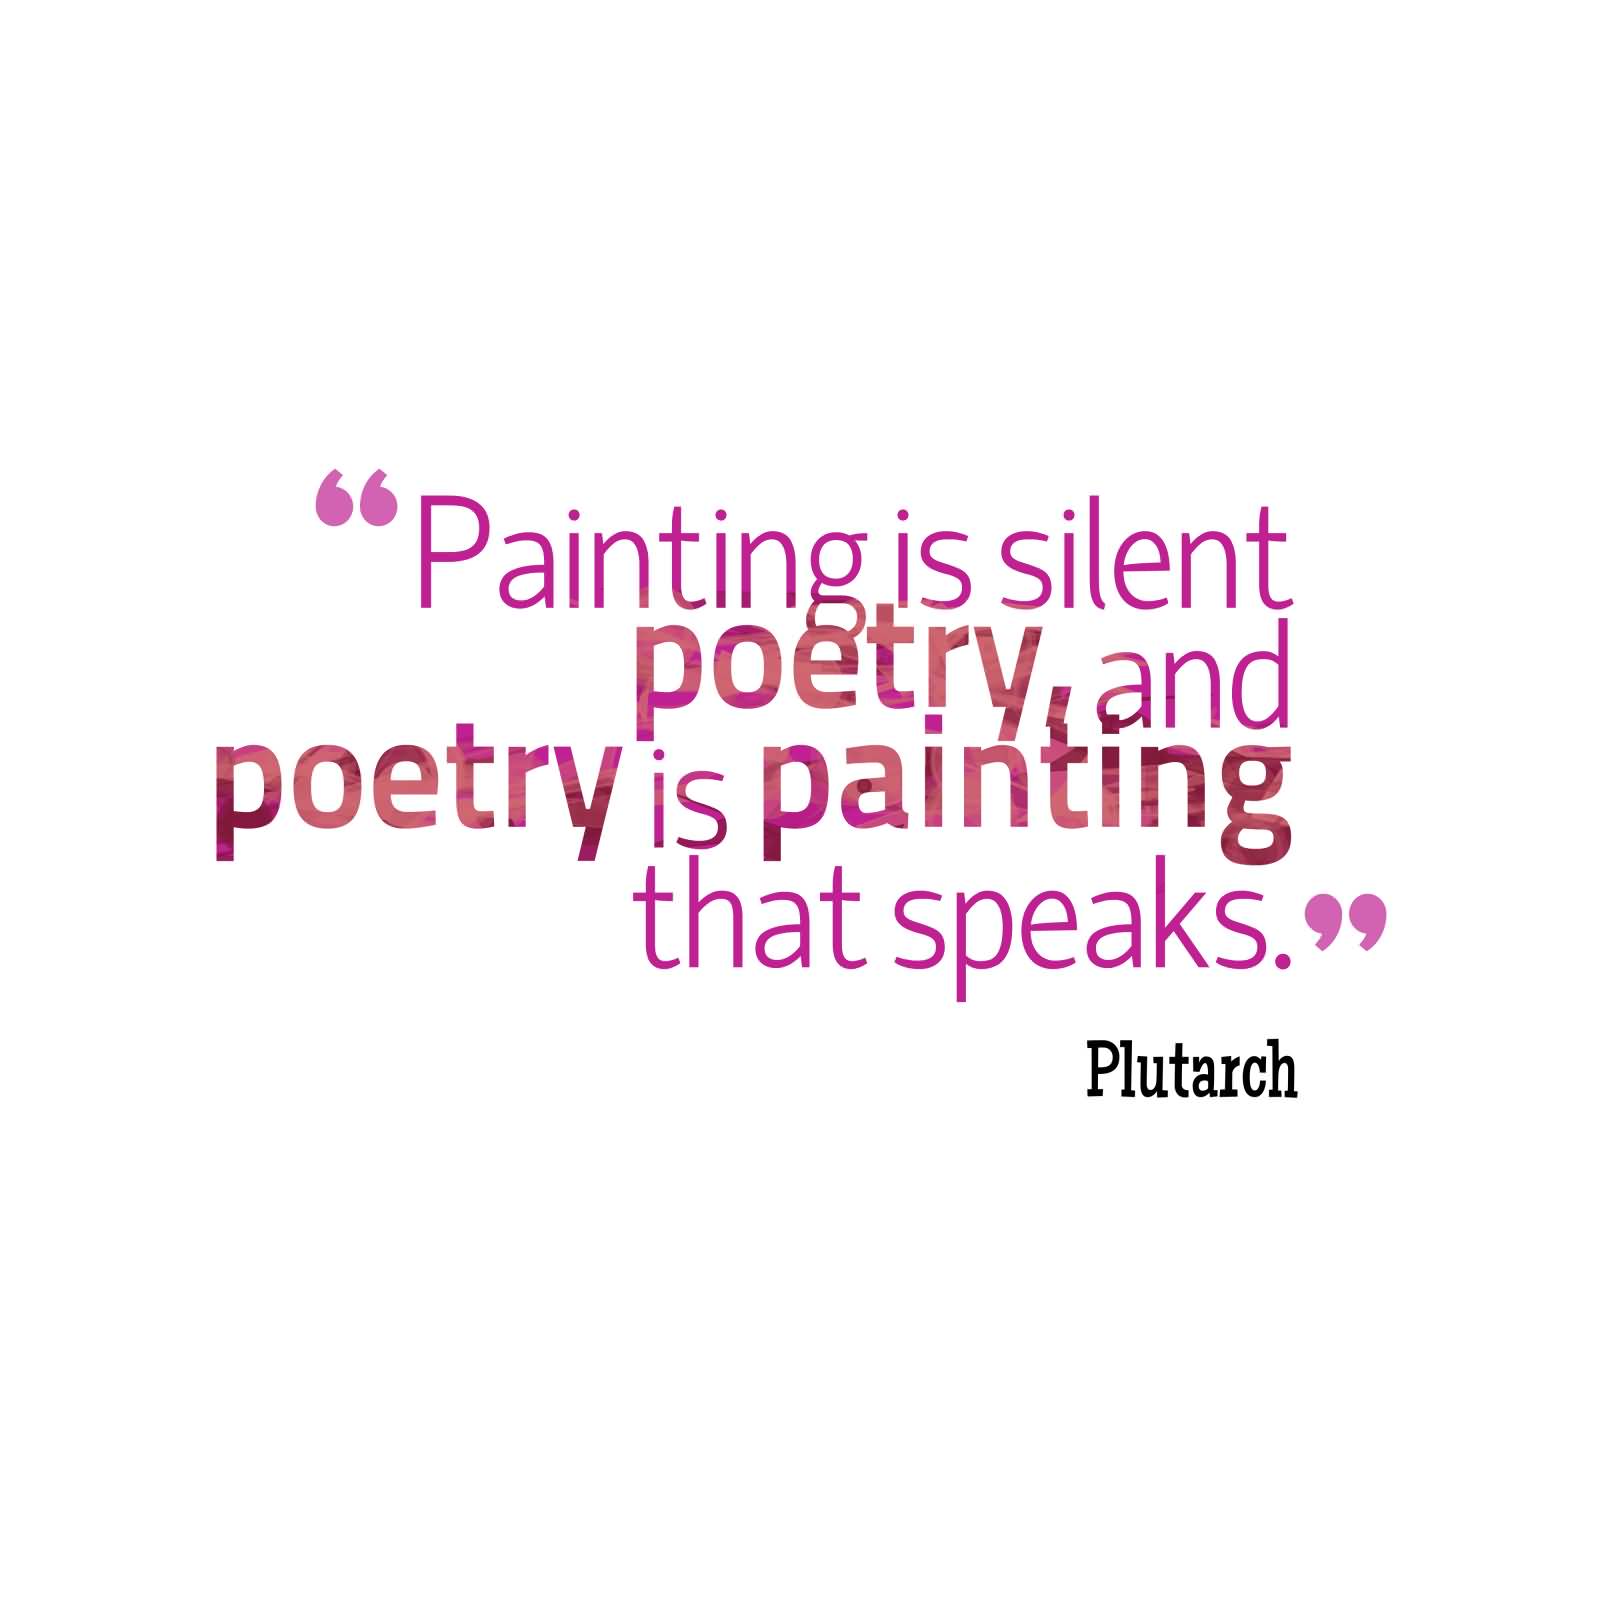 Painting is silent poetry, and poetry is painting that speaks. Plutarch